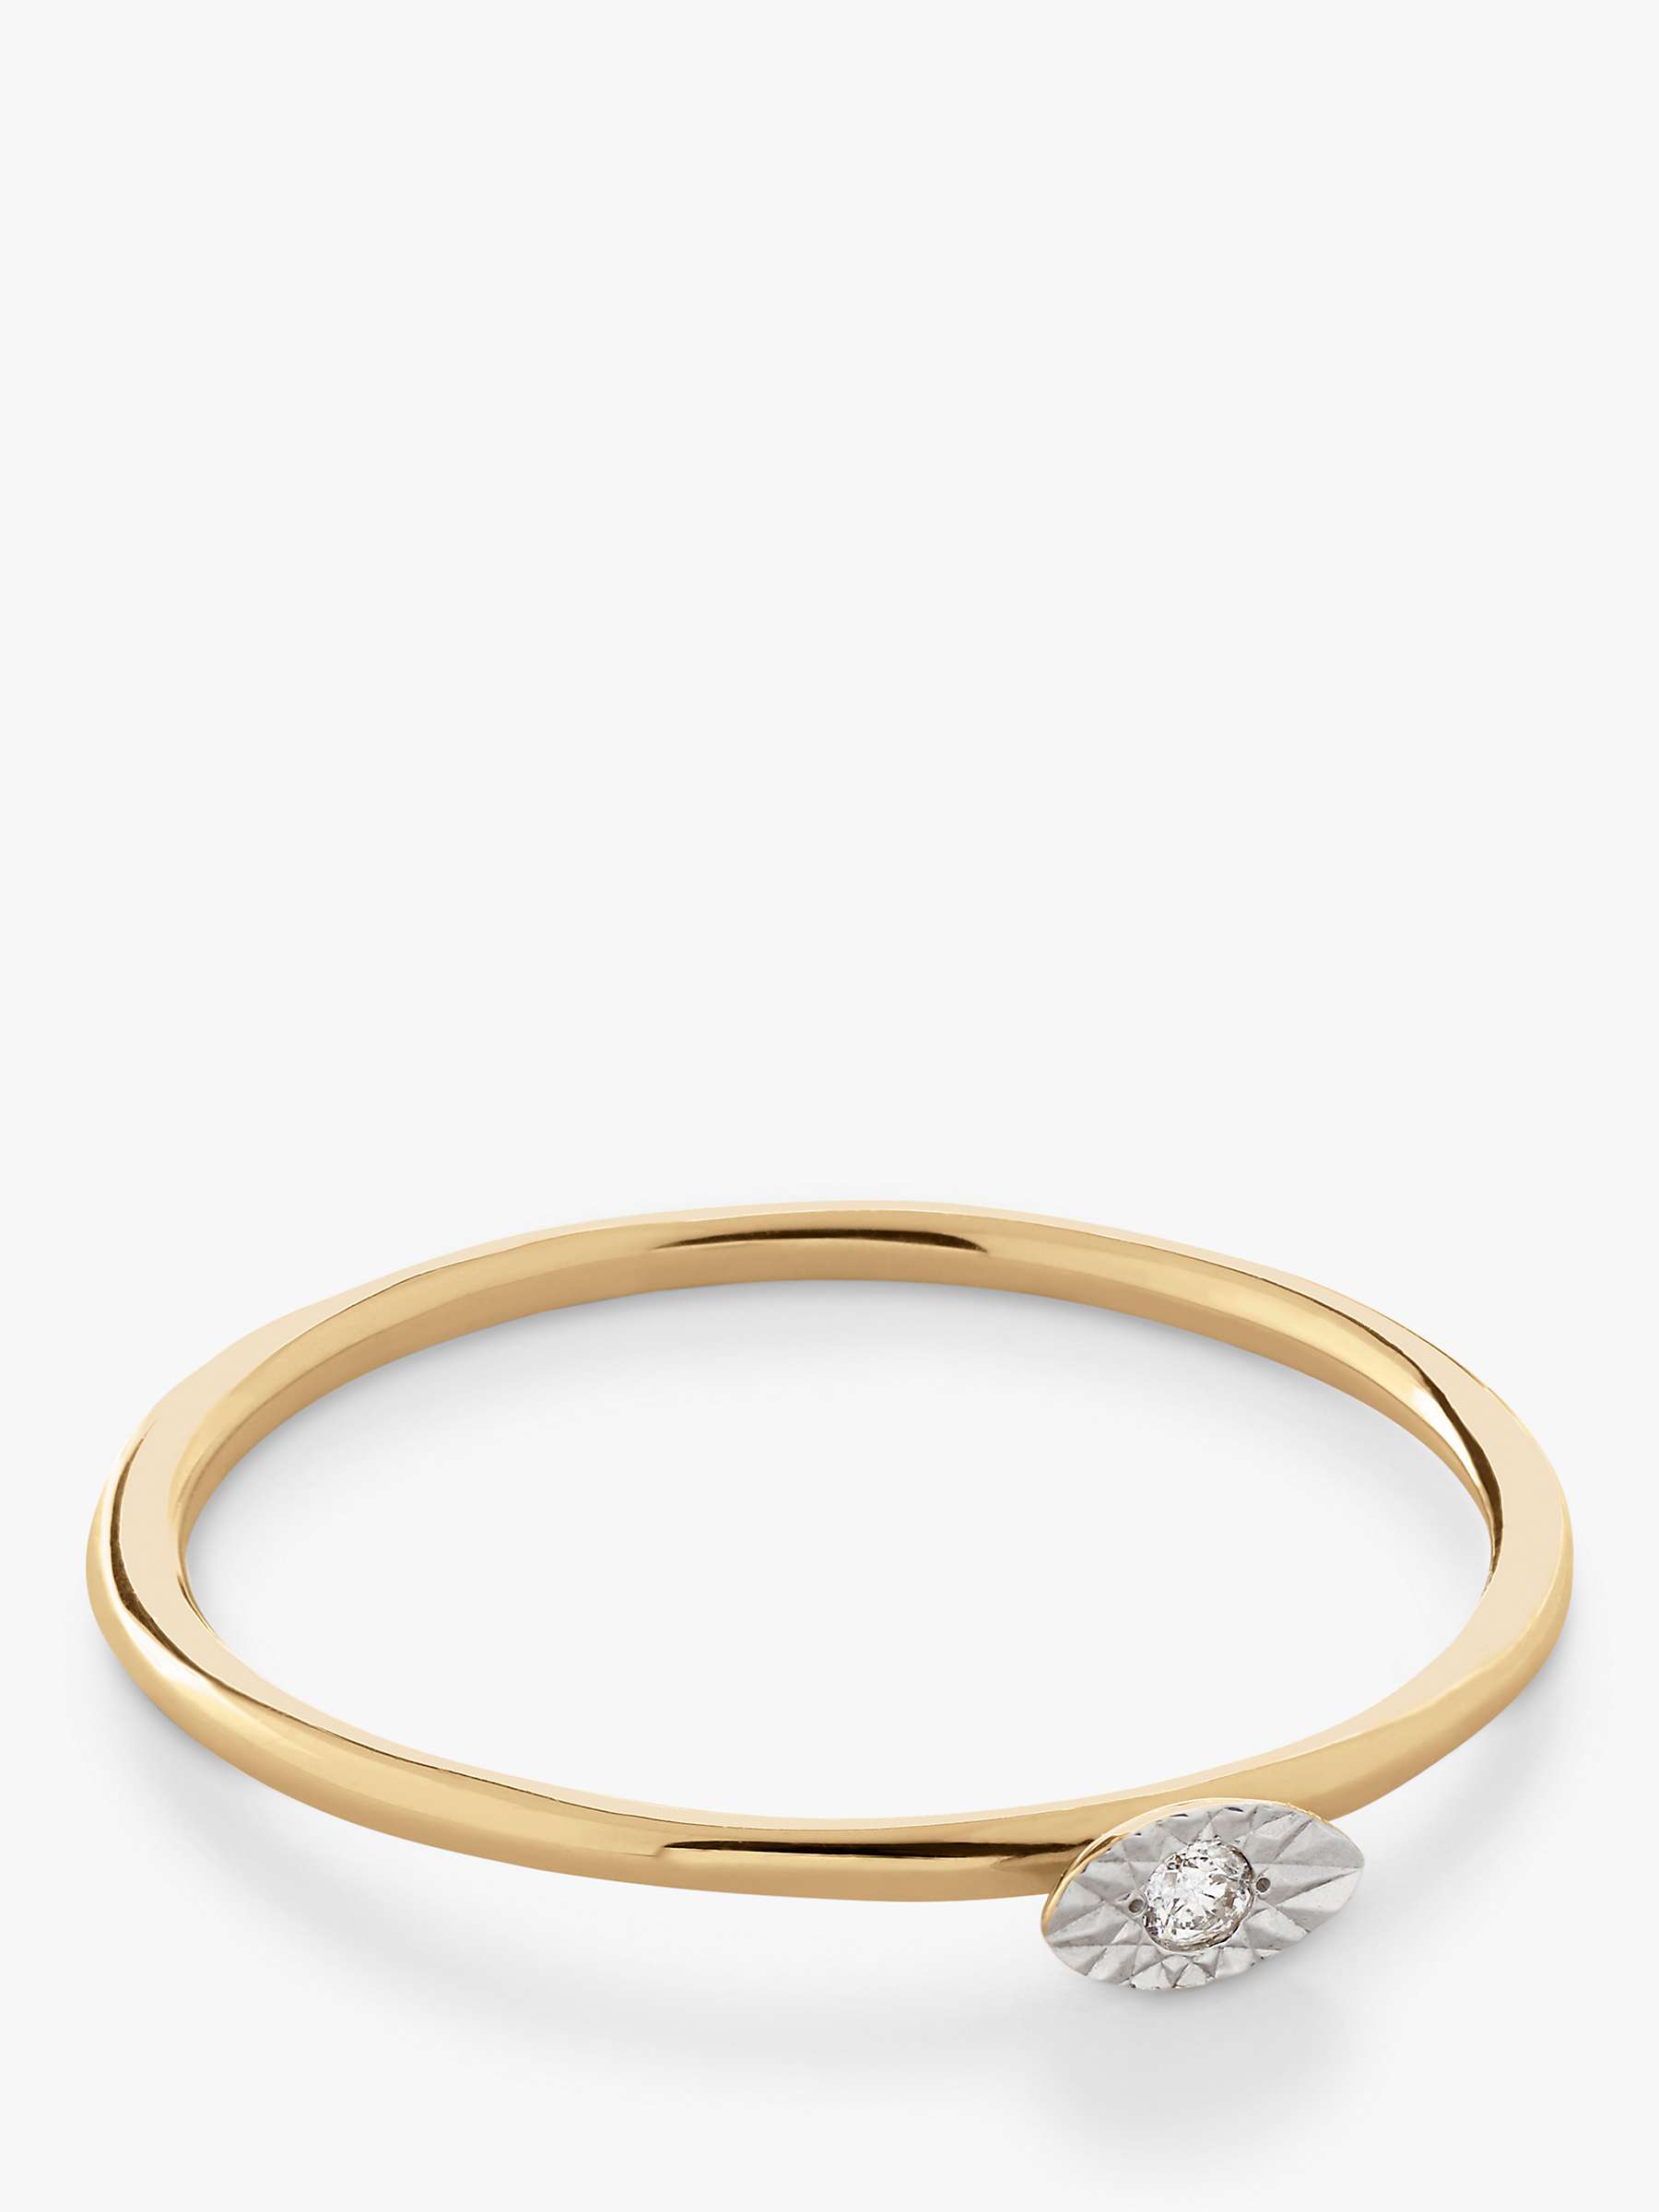 Buy Monica Vinader Marquise 14ct Yellow Gold Diamond Stacking Ring, Gold Online at johnlewis.com